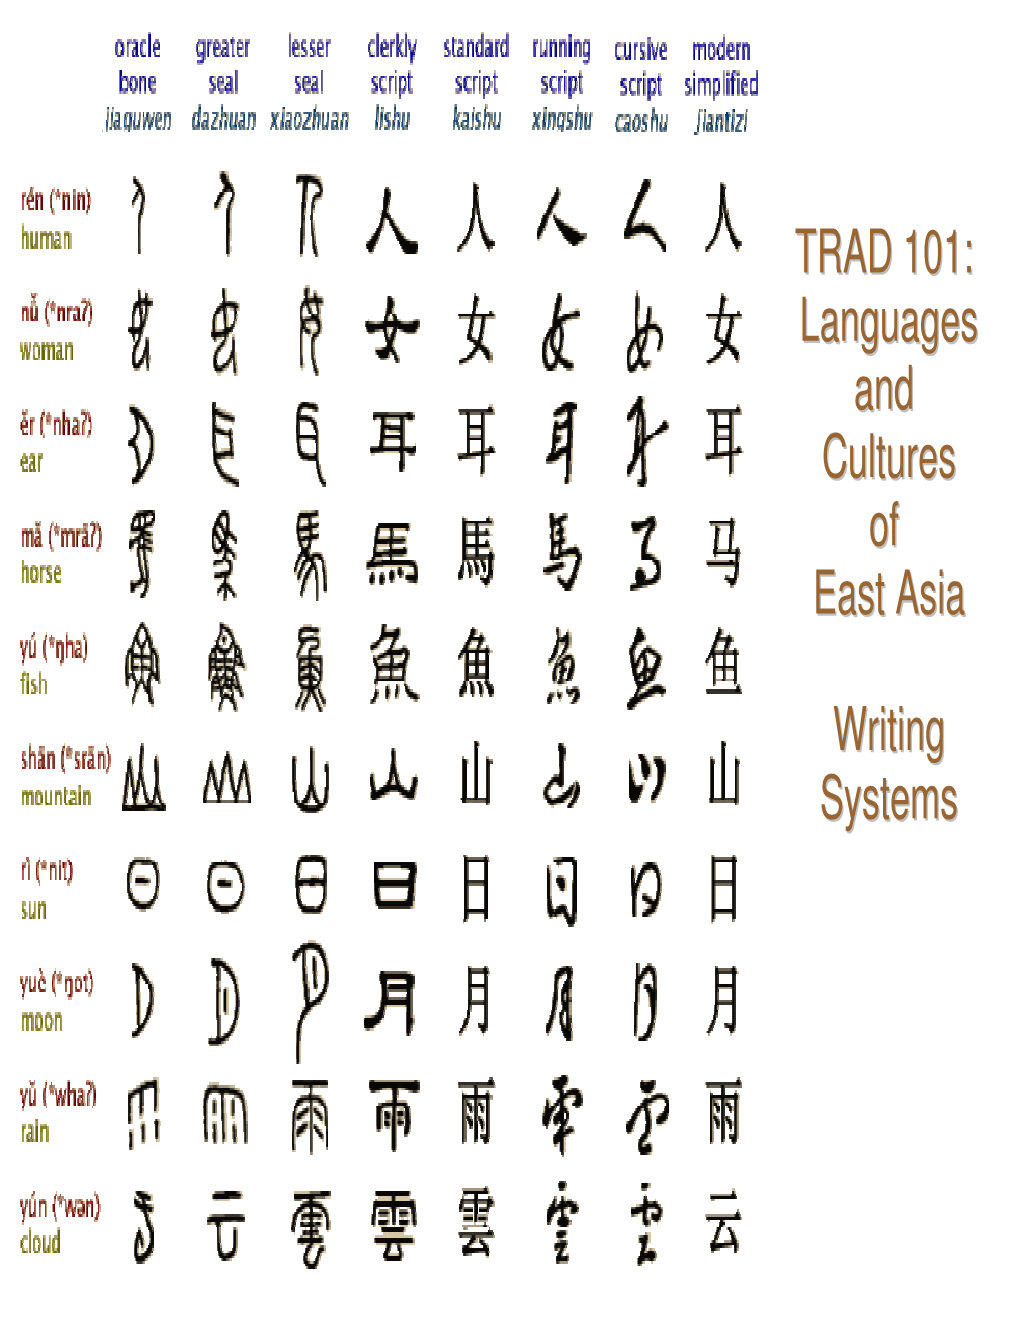 TRAD 101: Languages and Cultures of East Asia Writing Systems